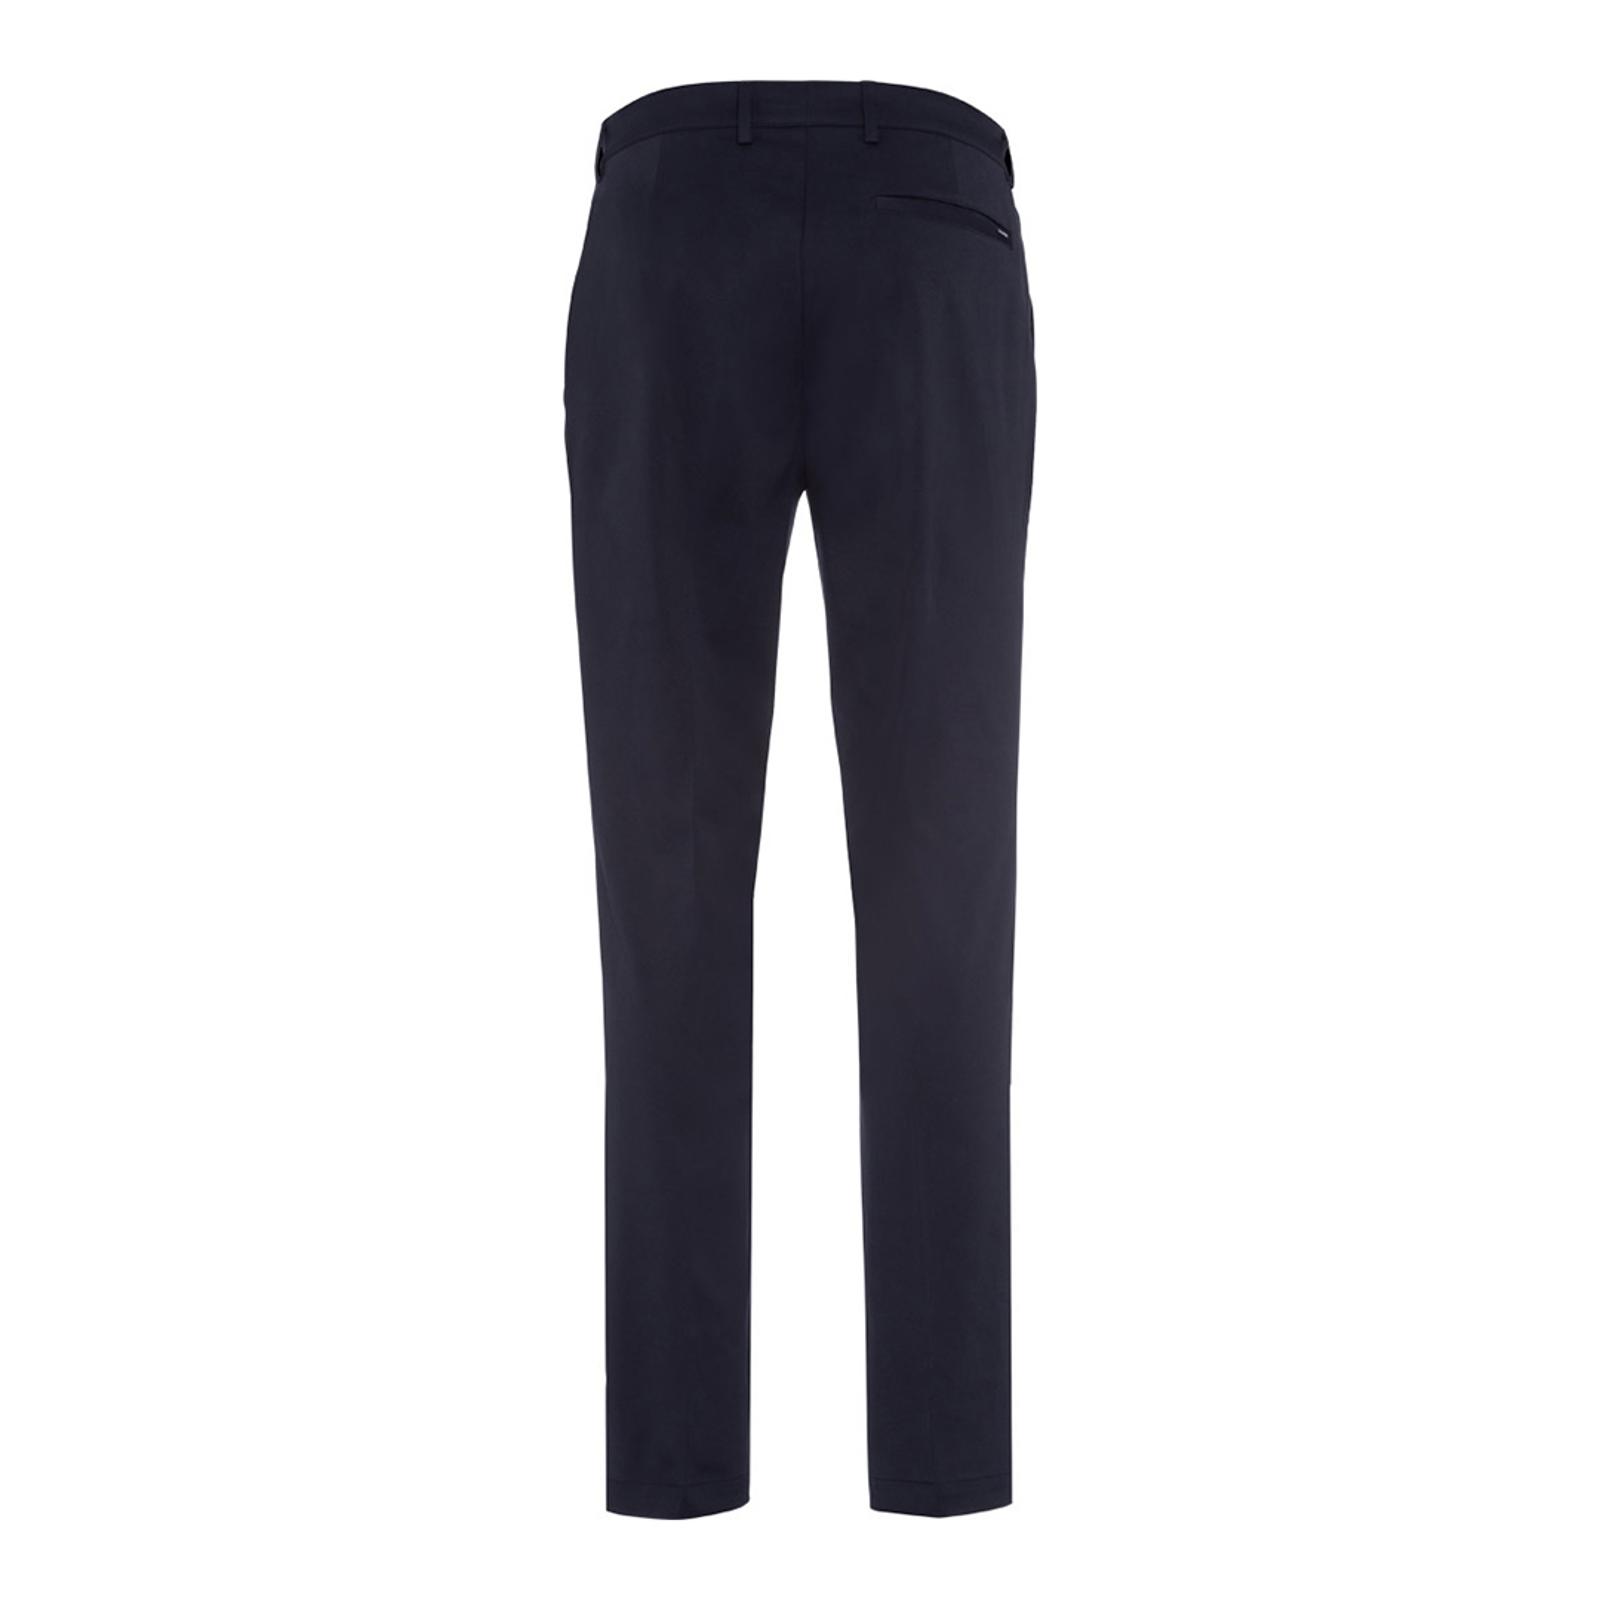 Navy Technical Stretch Light Trousers - BrandAlley